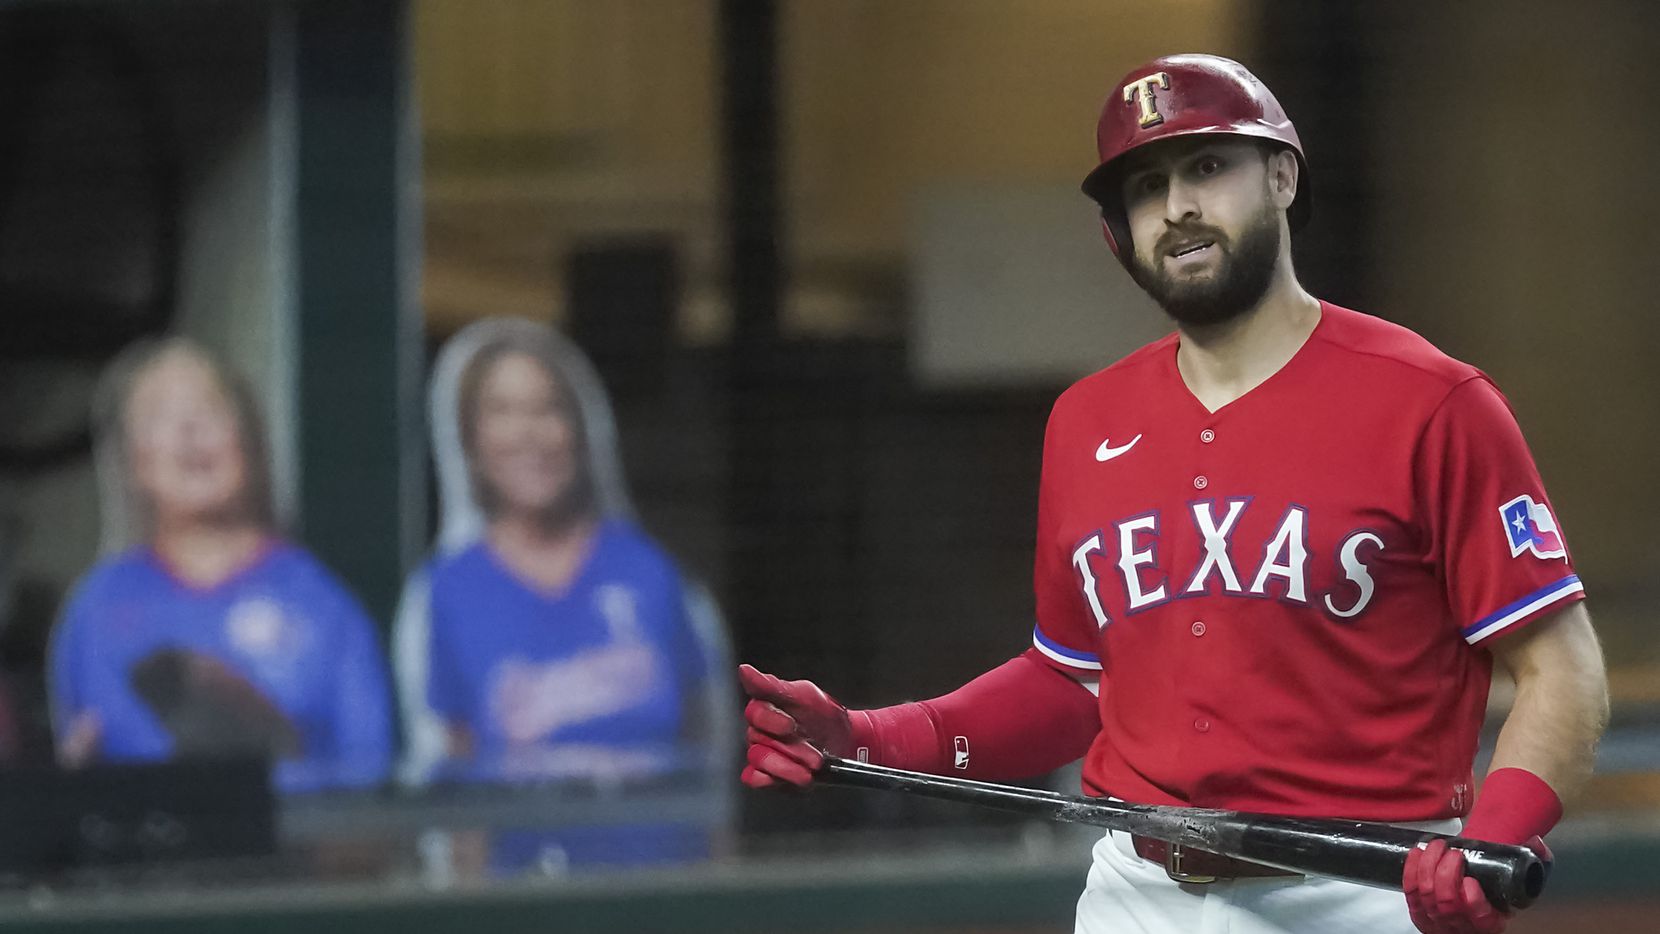 Texas Rangers outfielder Joey Gallo heads back to the dugout after a called third strike with the bases loaded during the third inning against the Los Angeles Dodgers at Globe Life Field on Sunday, Aug. 30, 2020.